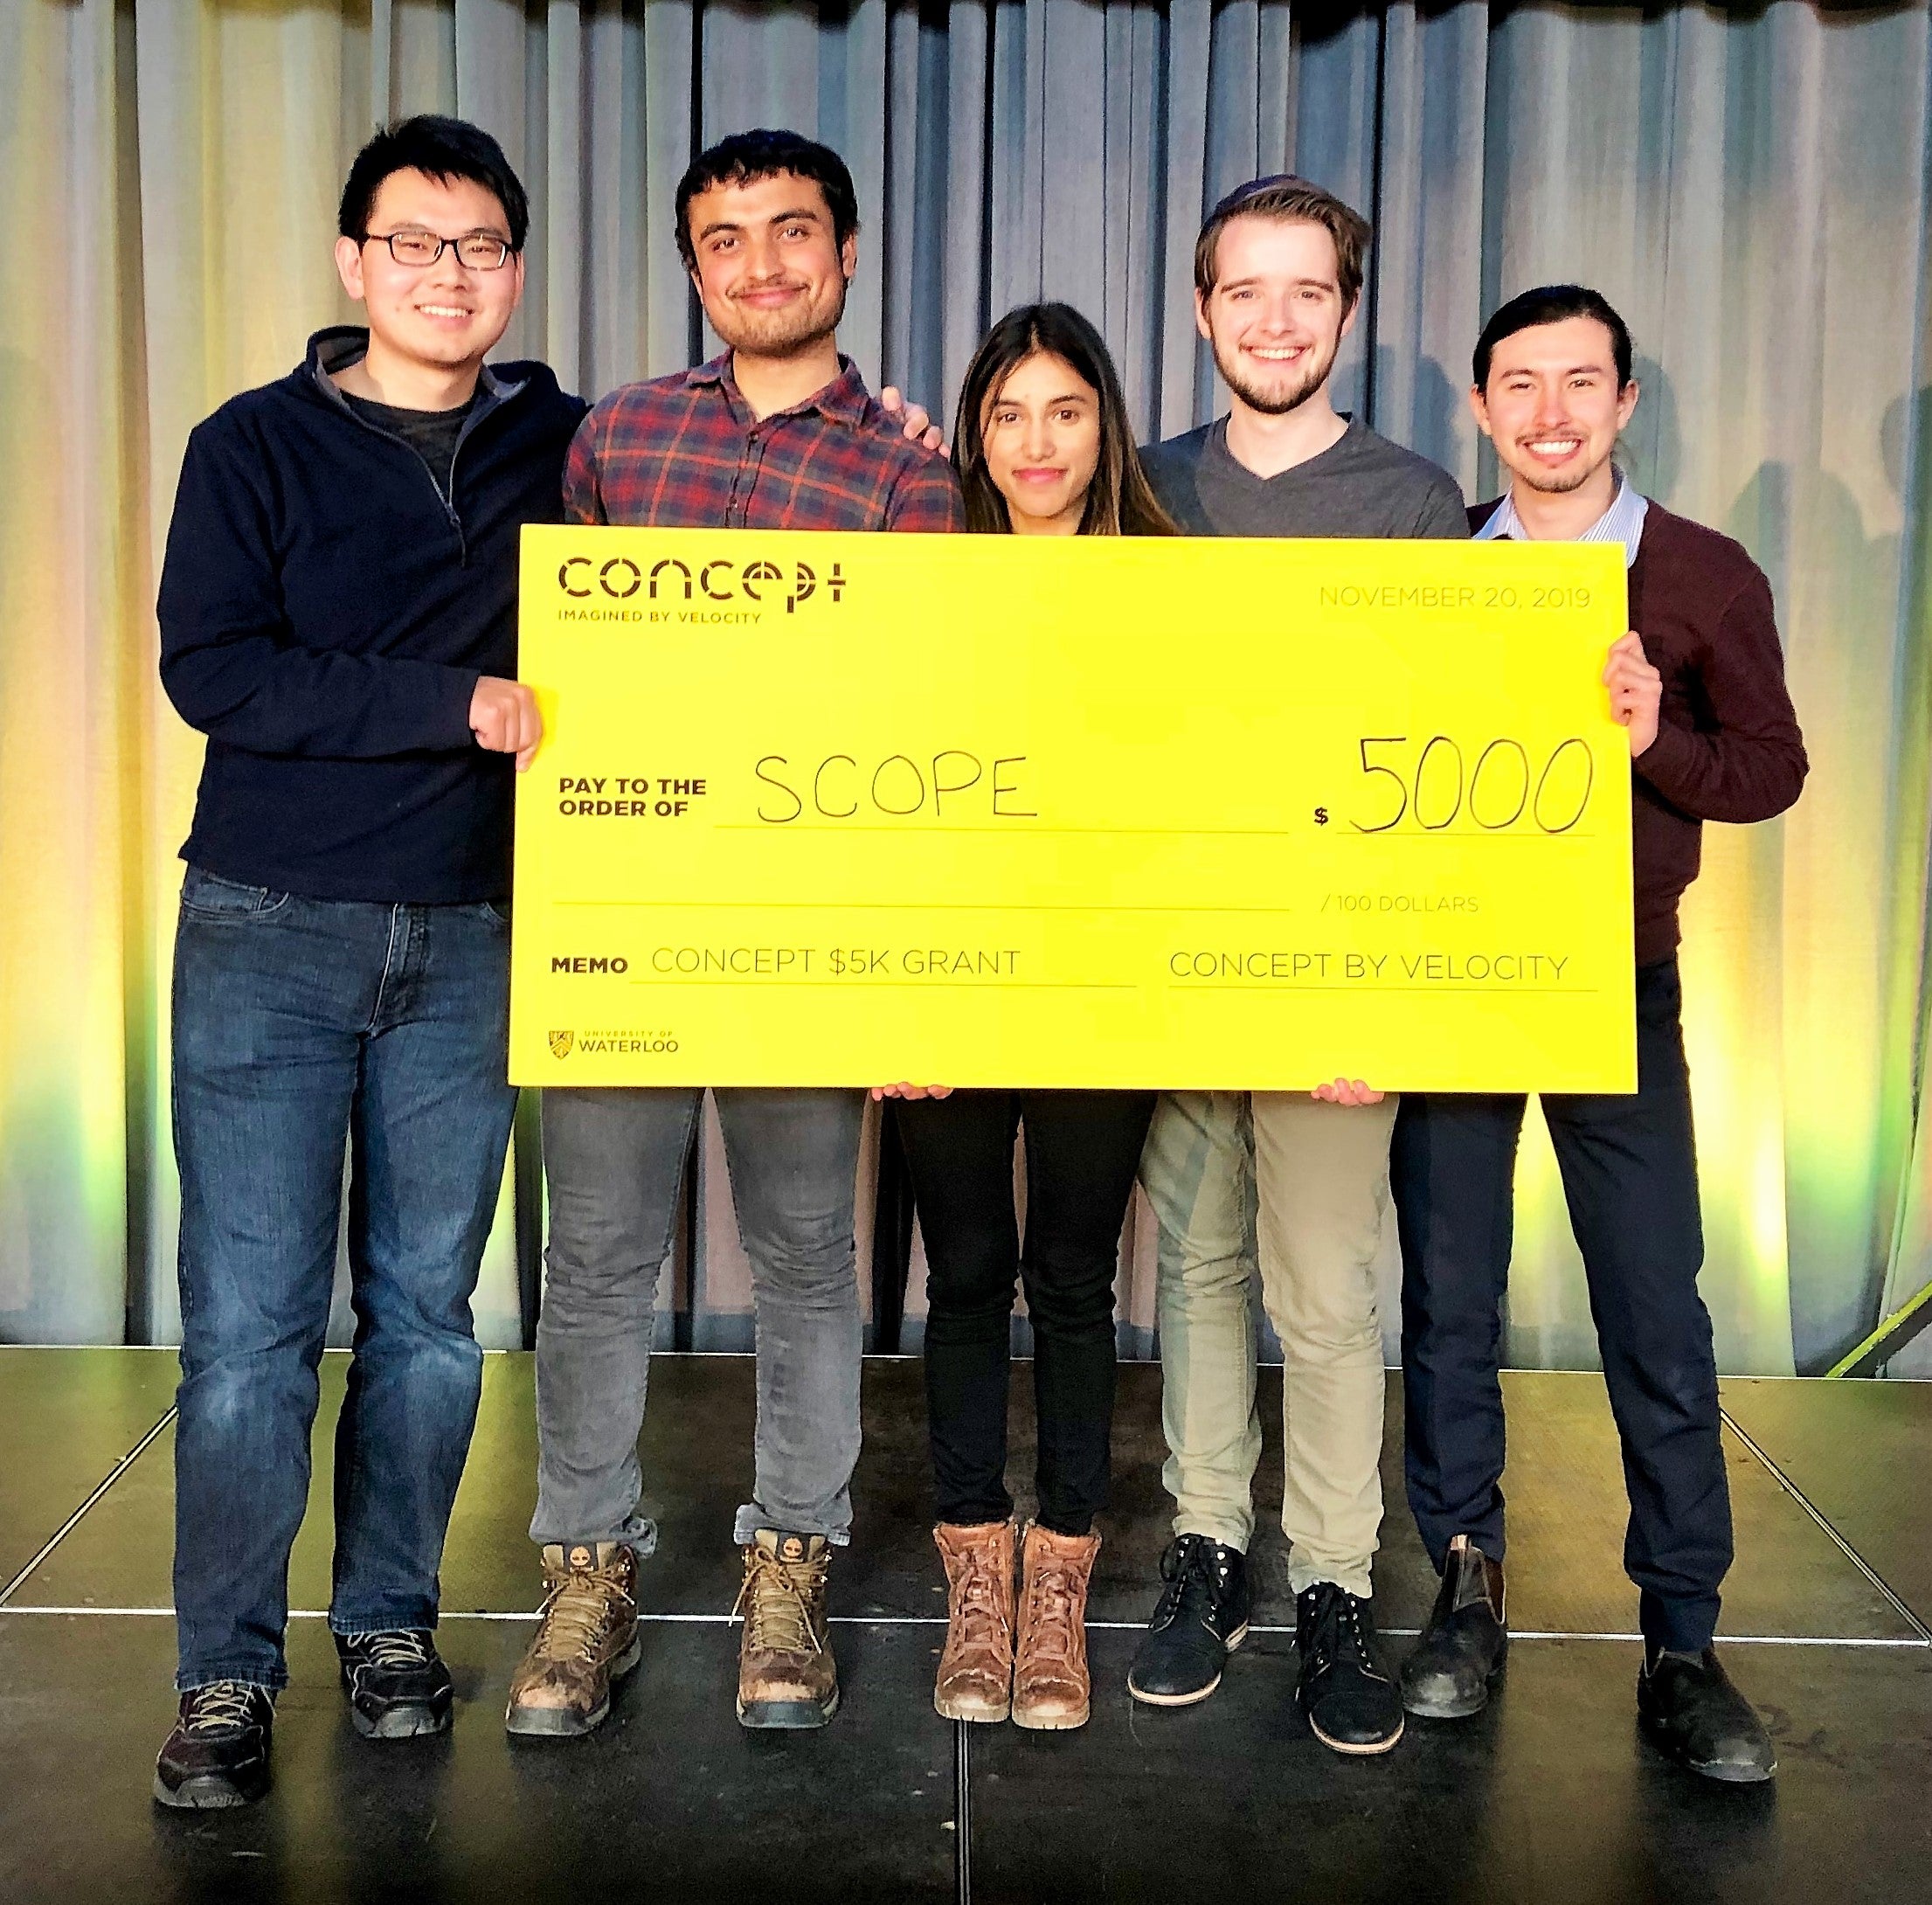 Scope members (left to right) Zhenle Cao, Ishan Mishra, Alisha Bhanji, Holden Beggs and Fernando Pena pose with their ceremonial cheque.